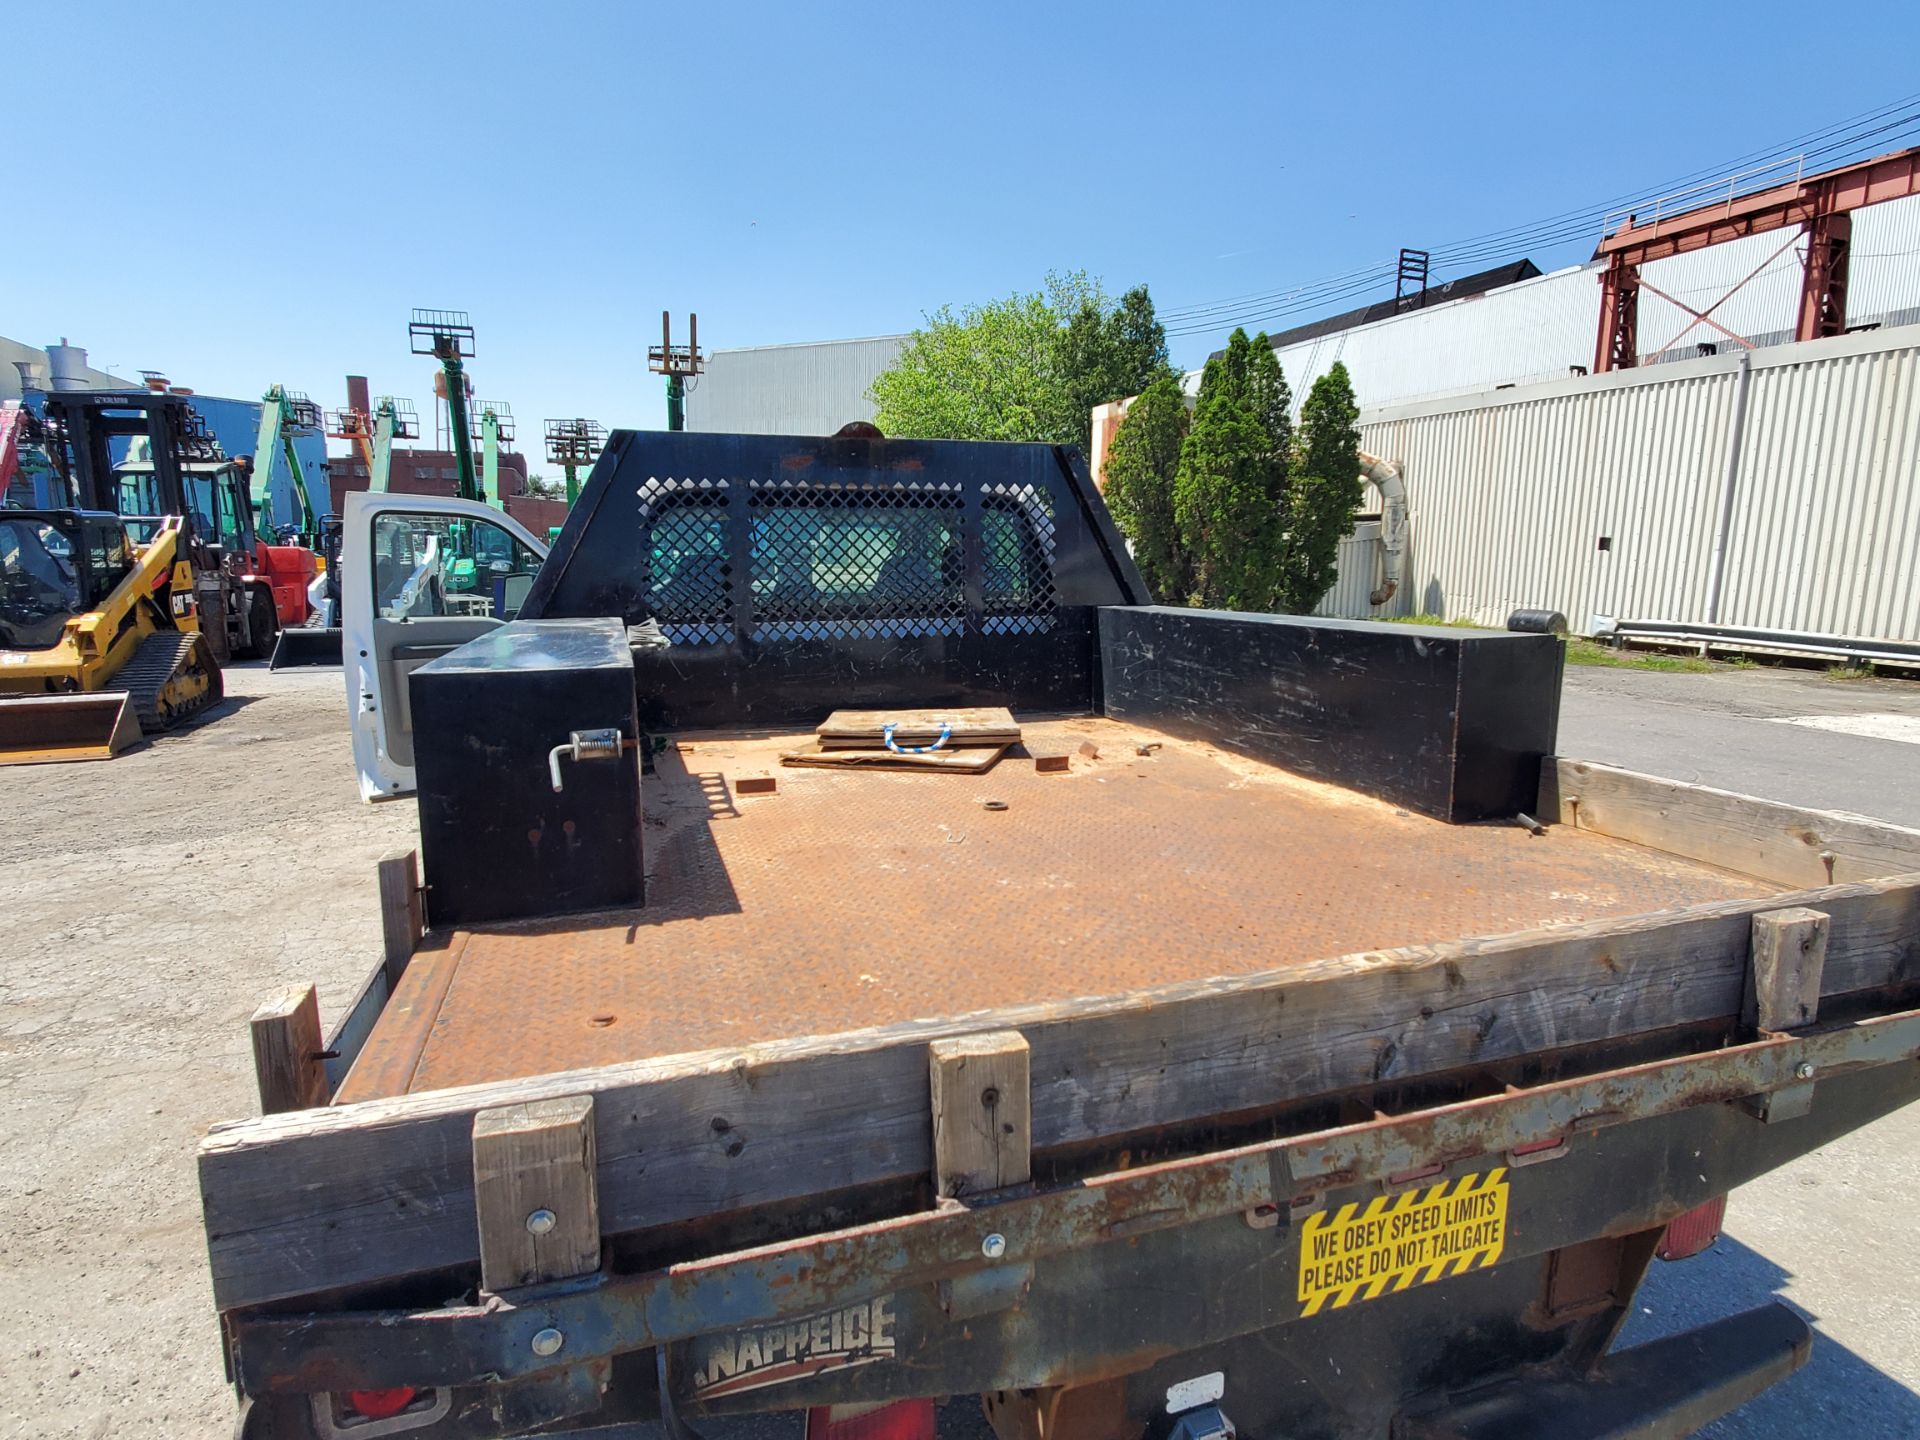 2010 Ford F450 Crew Cab Truck - Image 19 of 21